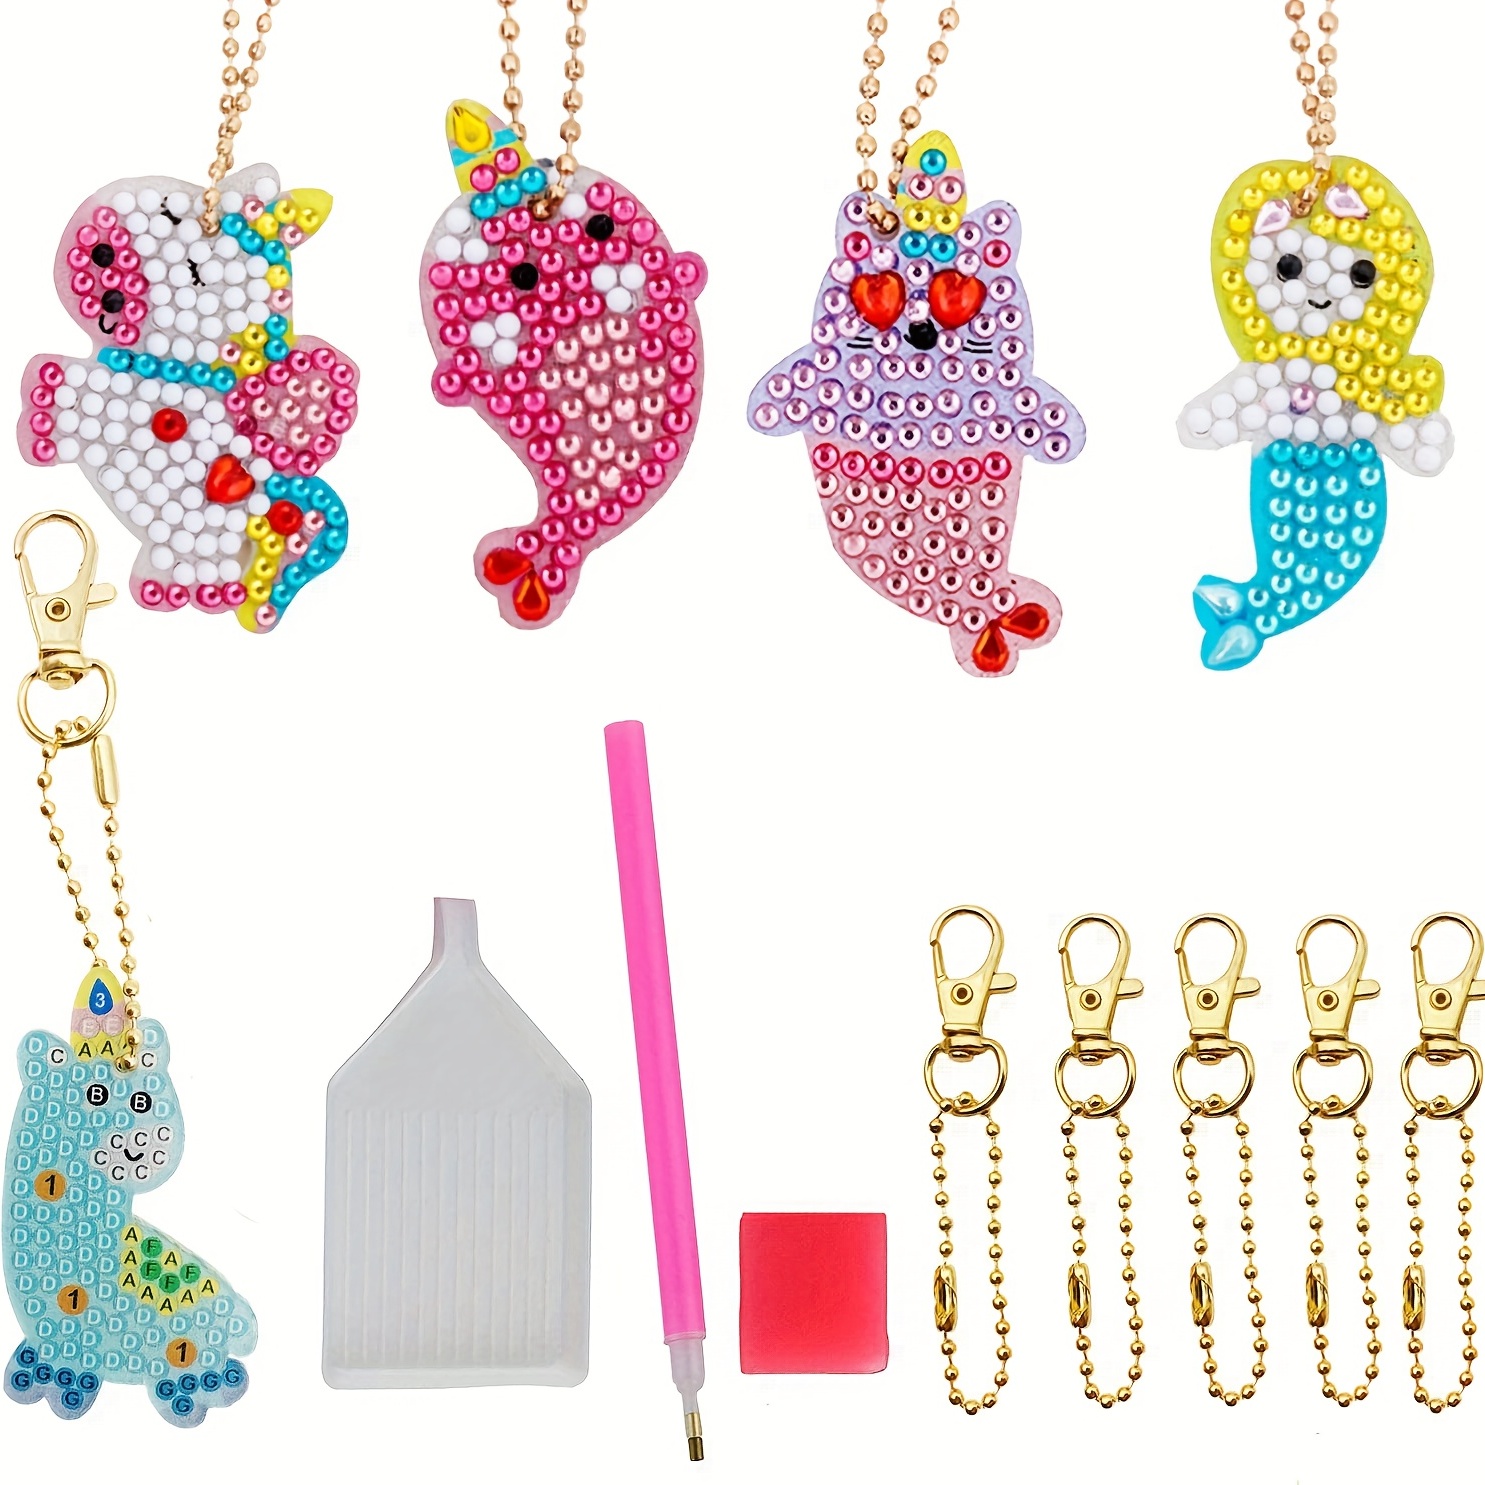 Arts and Crafts for Kids Ages 8-12 - Make Your Own GEM Keychains